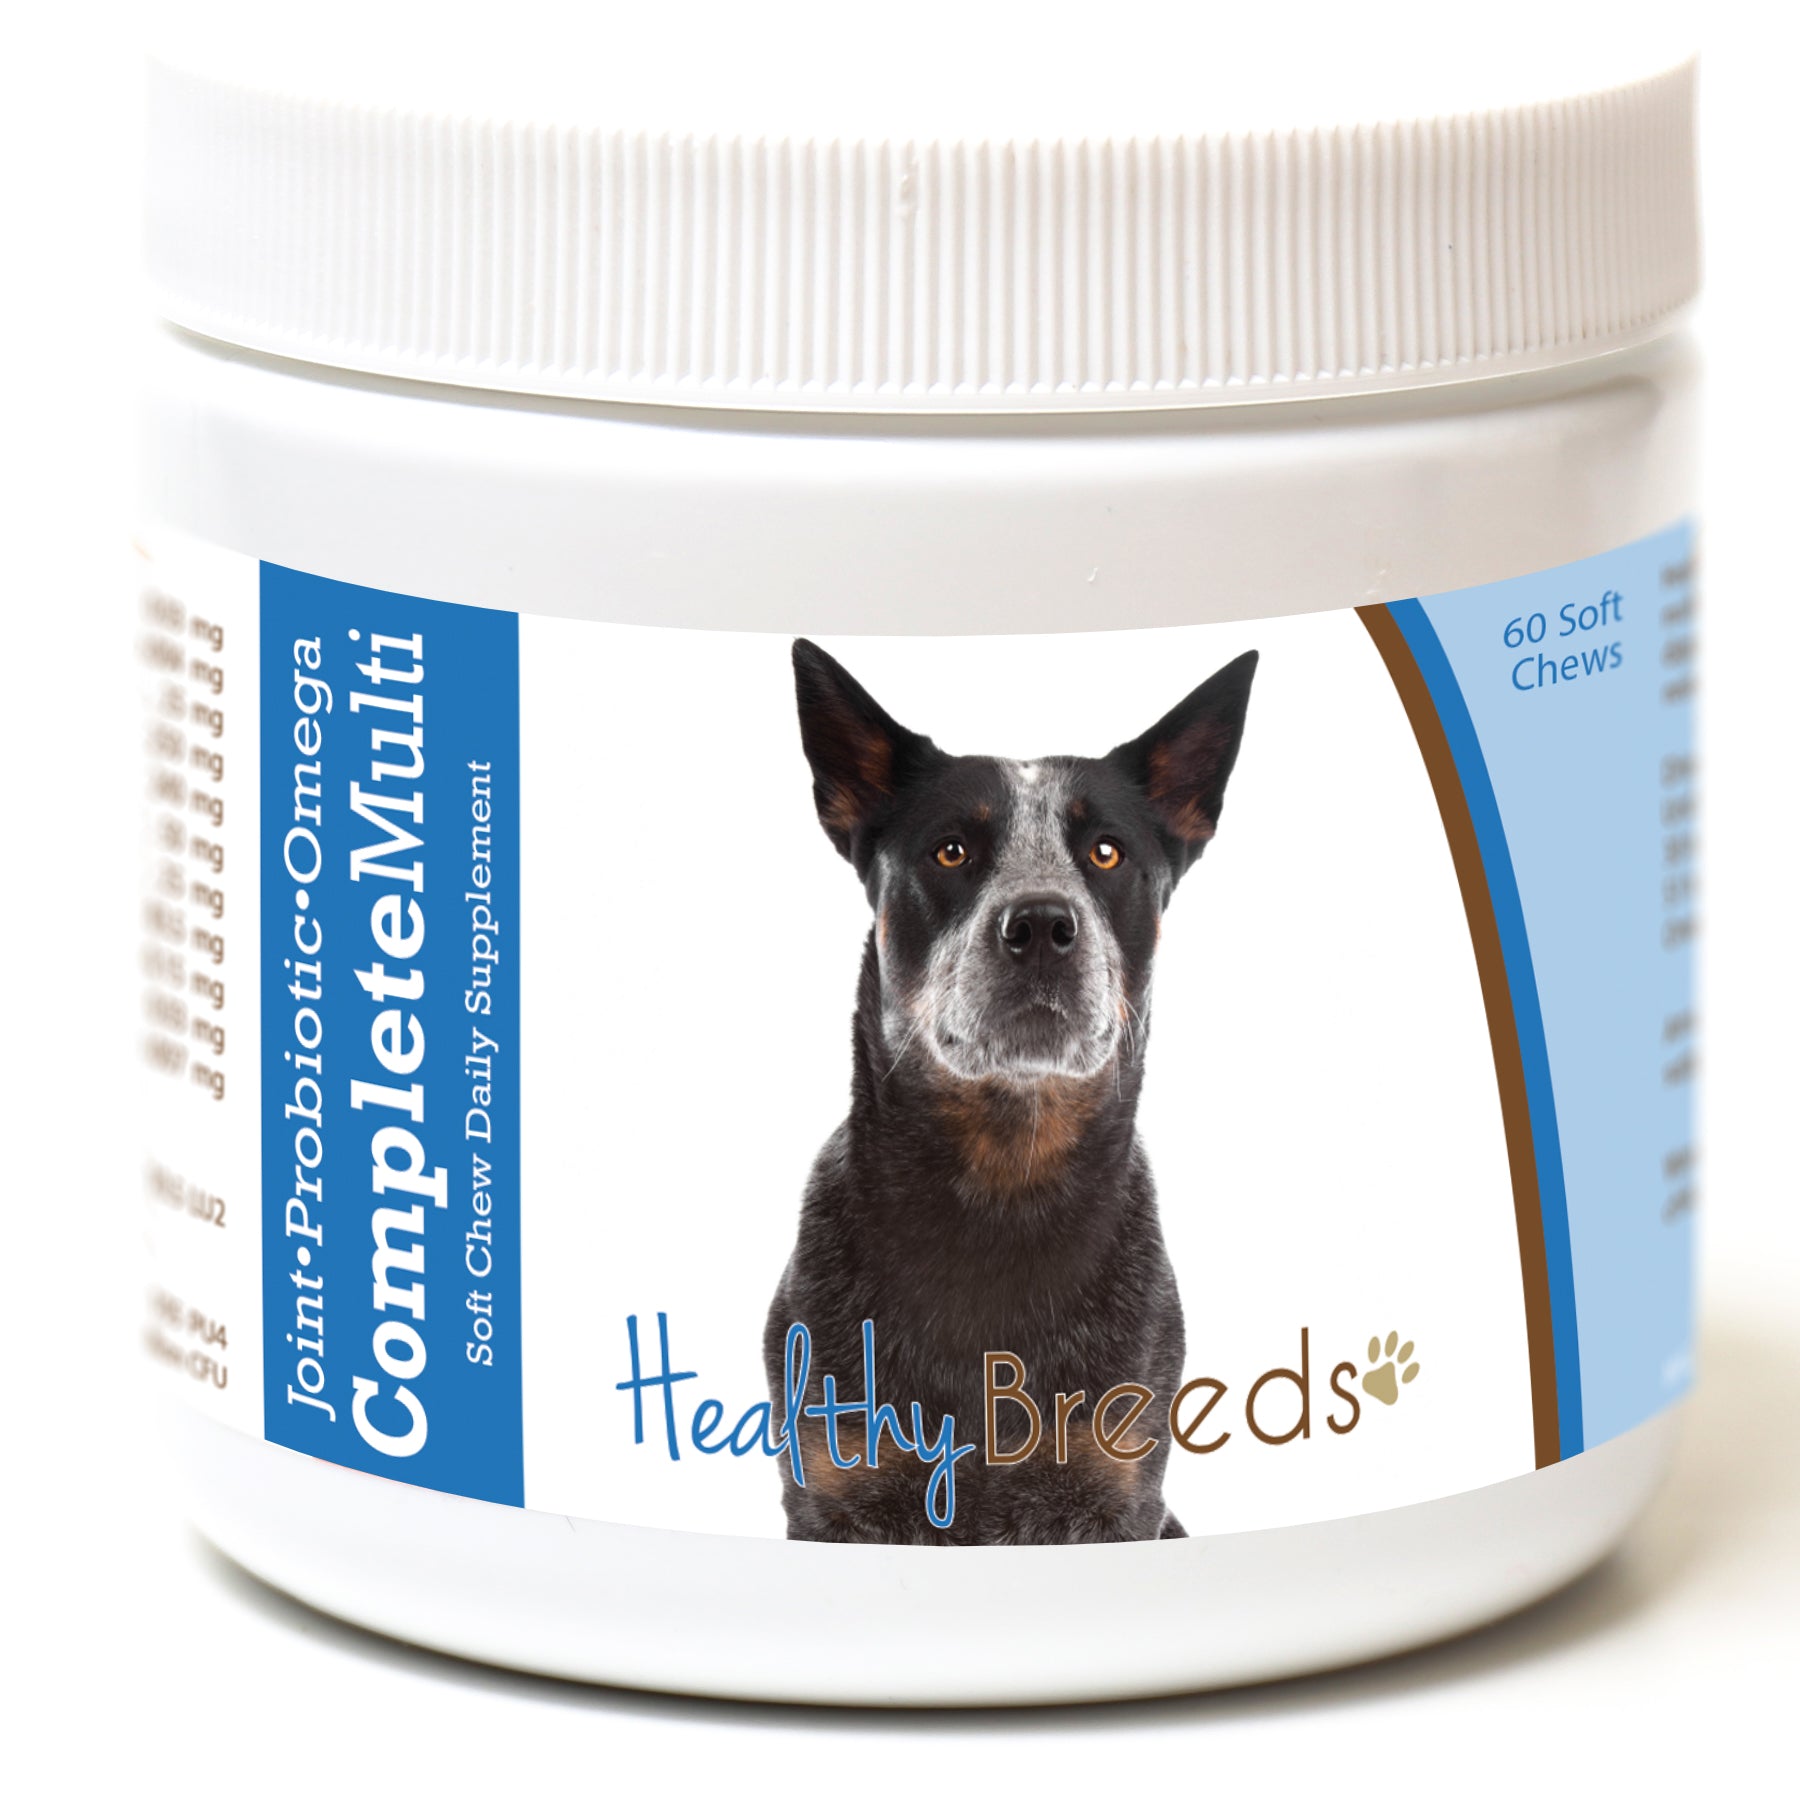 Australian Cattle Dog All In One Multivitamin Soft Chew 60 Count